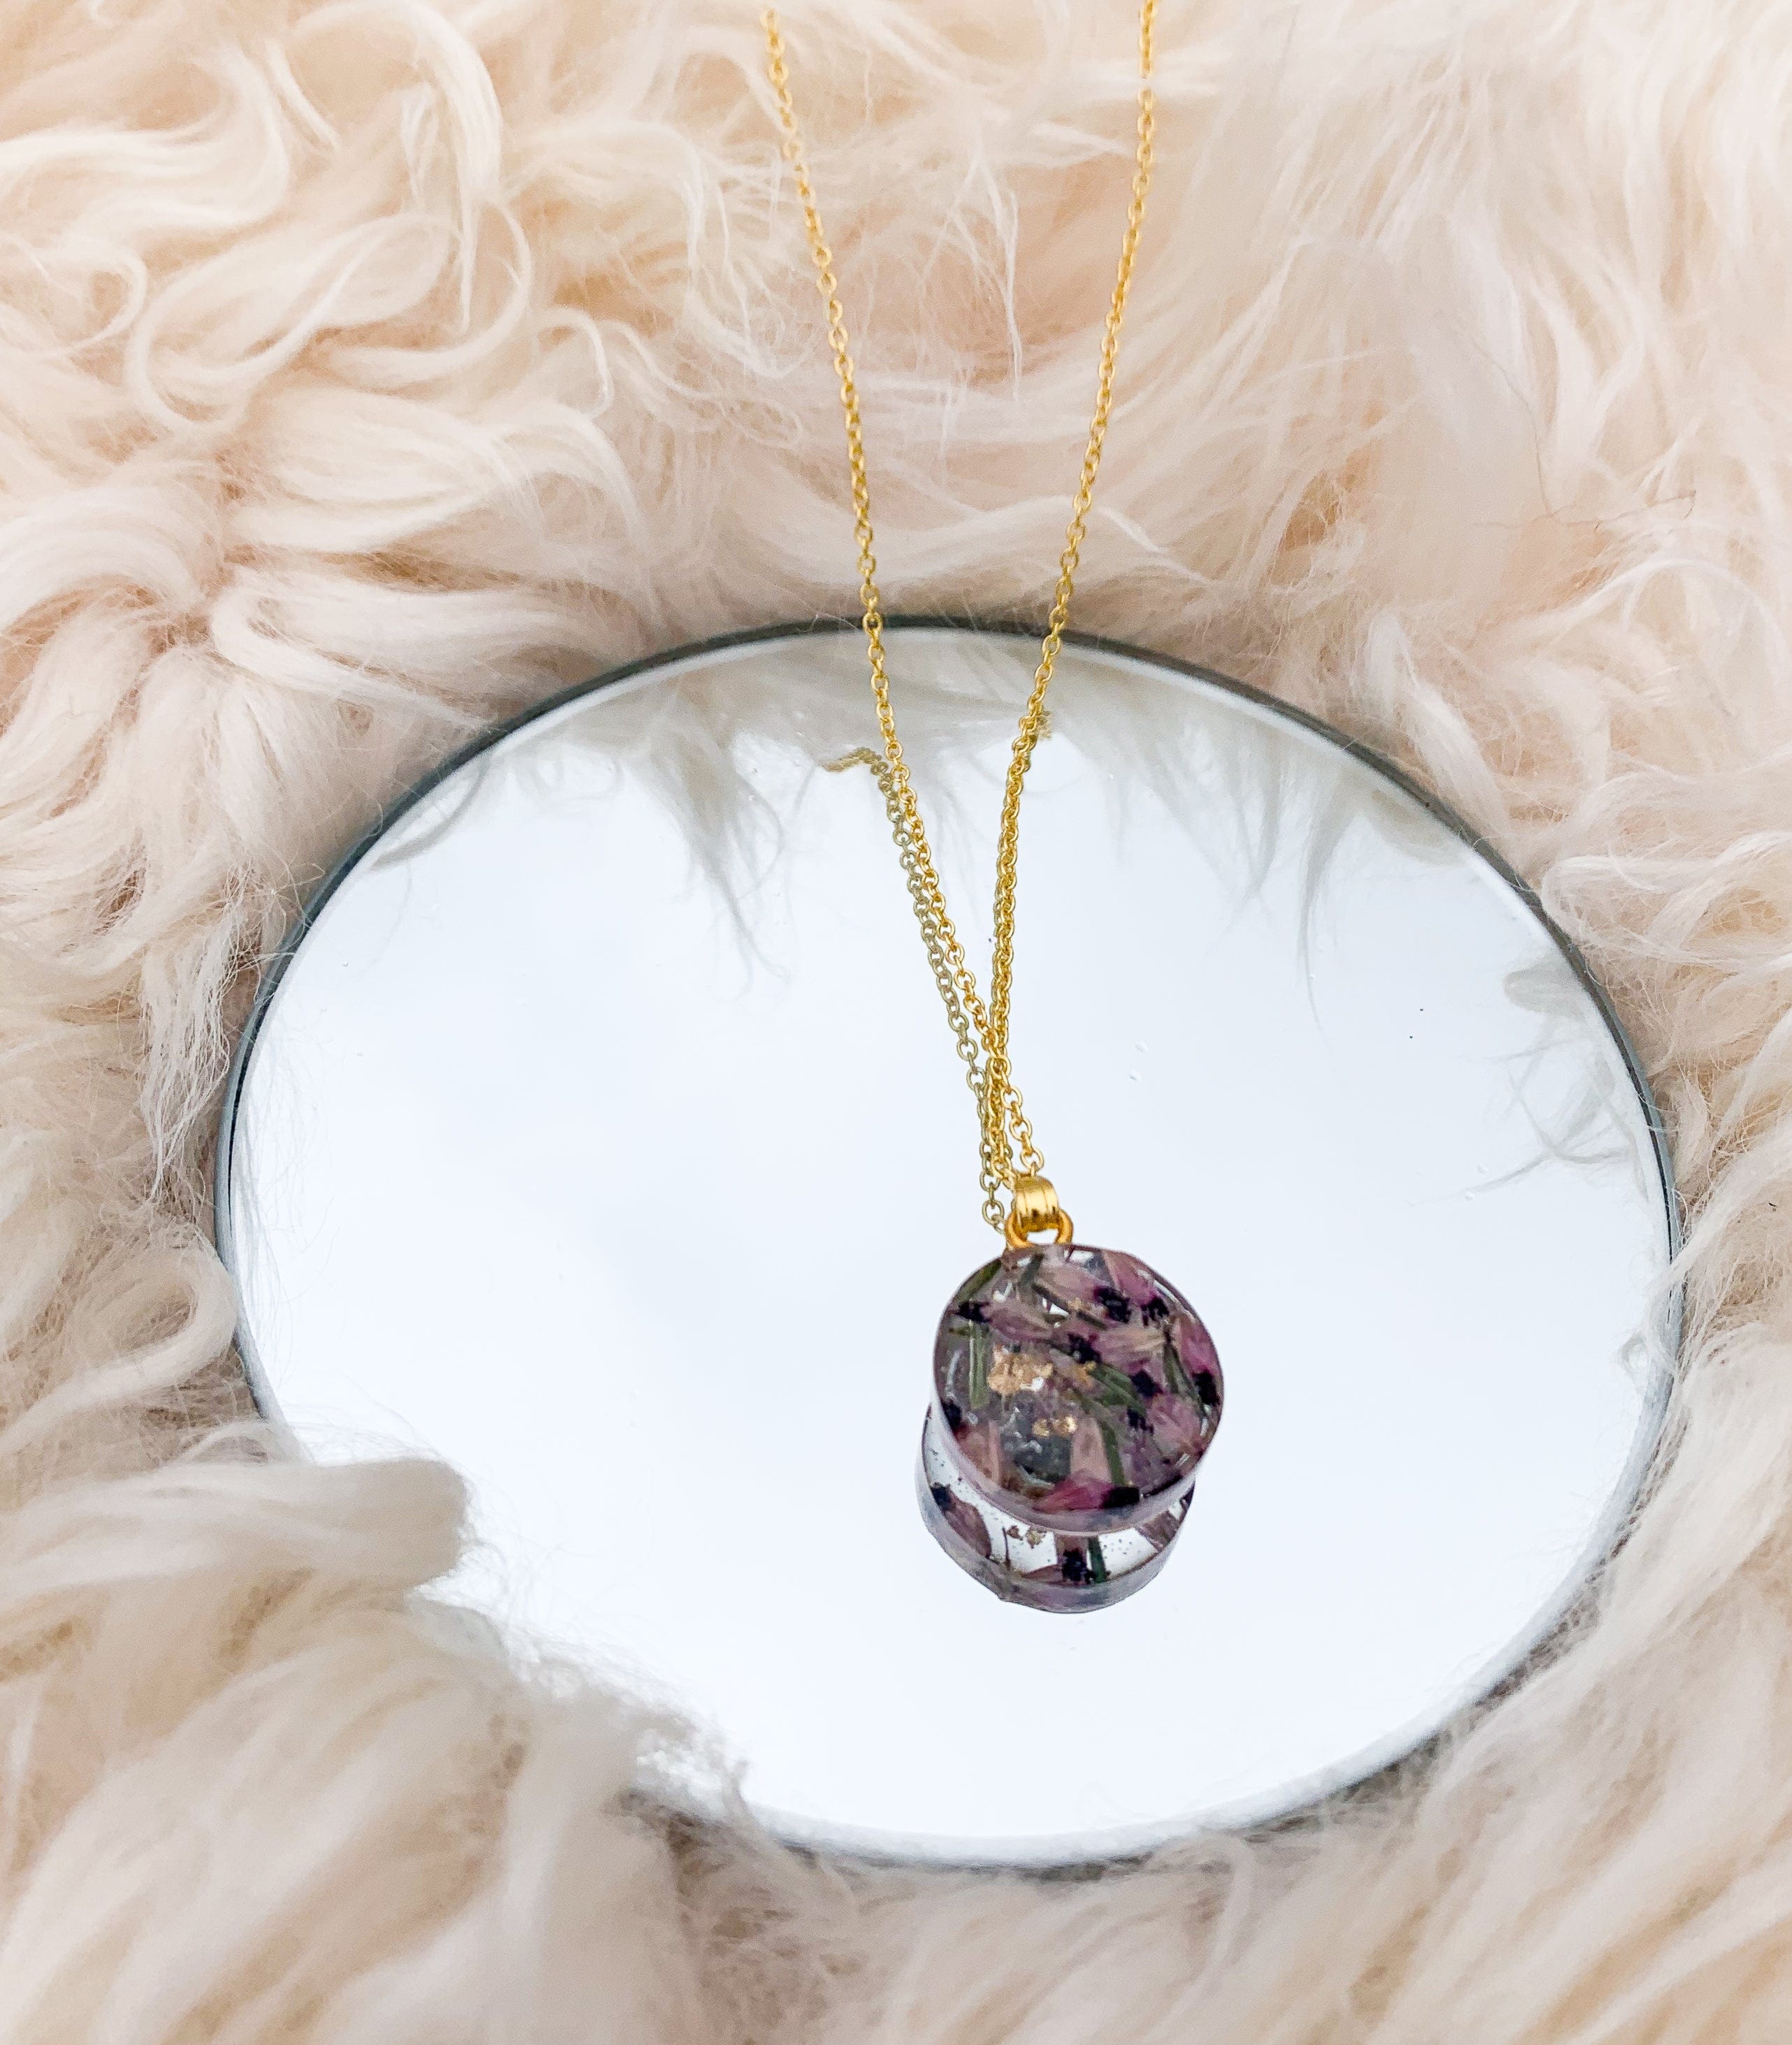 Planted By the Water Necklace - Heather Flower and Leaf